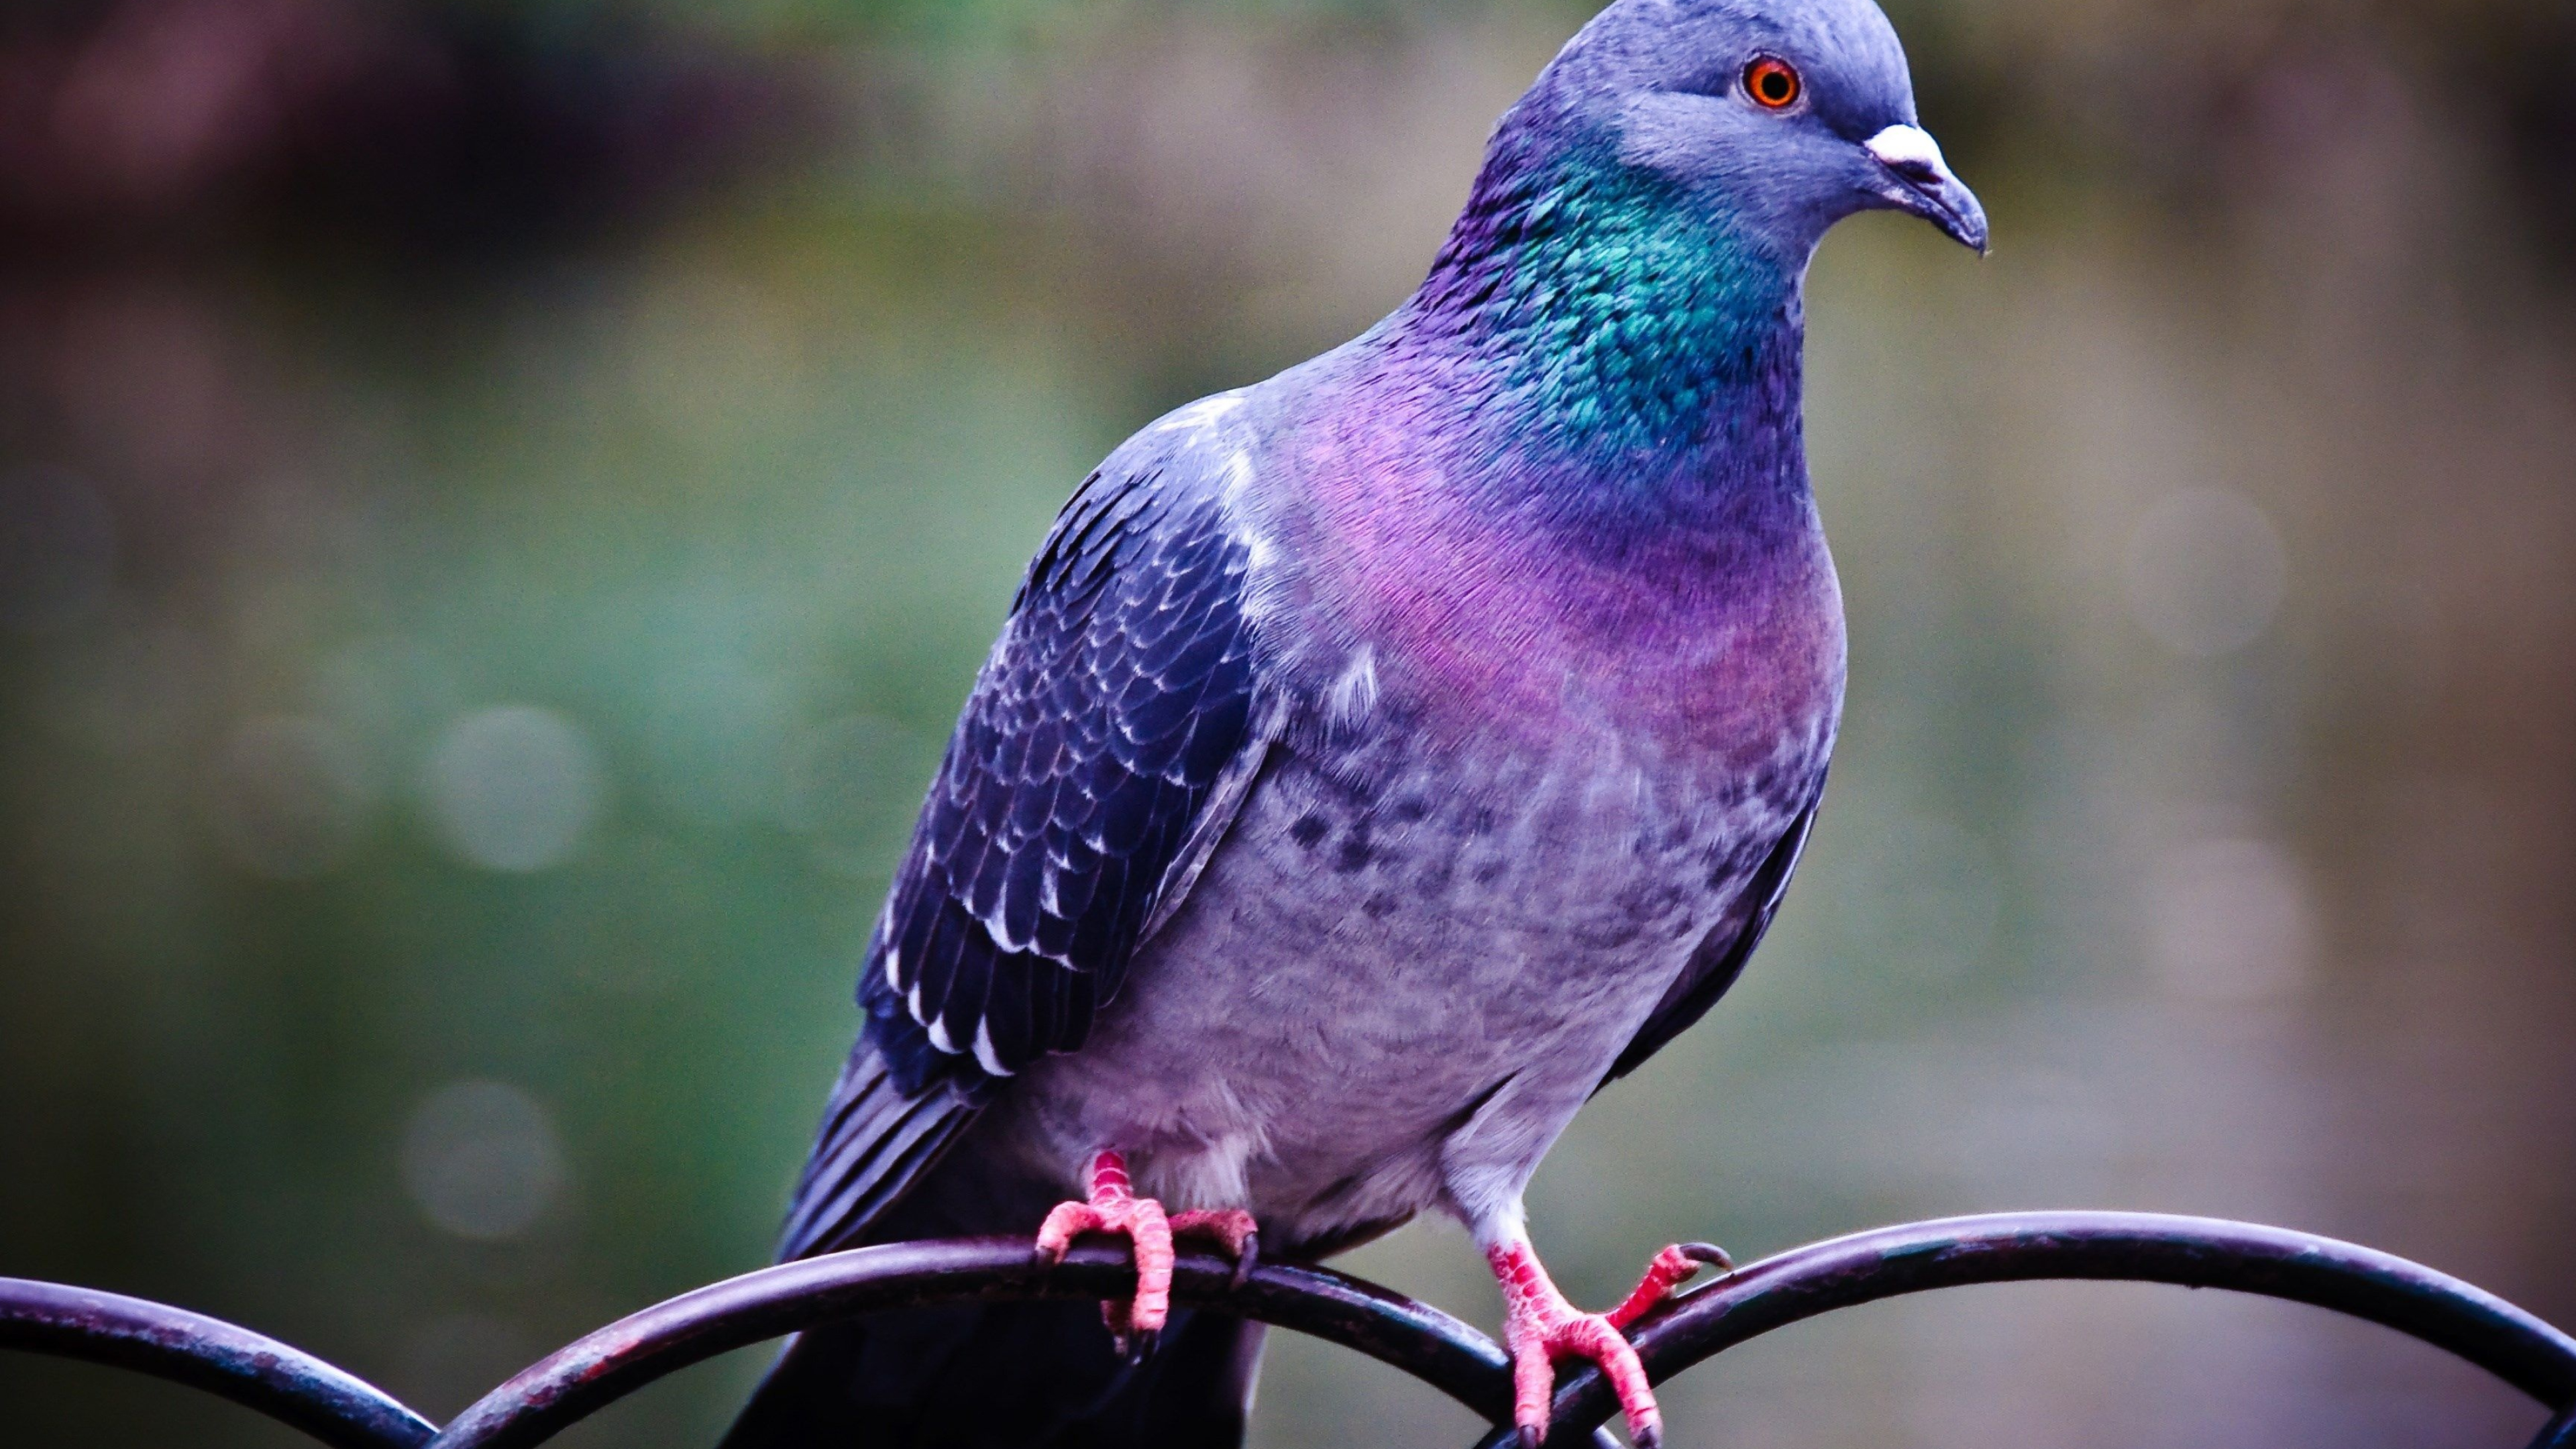 Pigeon: The Columbidae family contains 344 species divided into 50 genera. 3840x2160 4K Wallpaper.